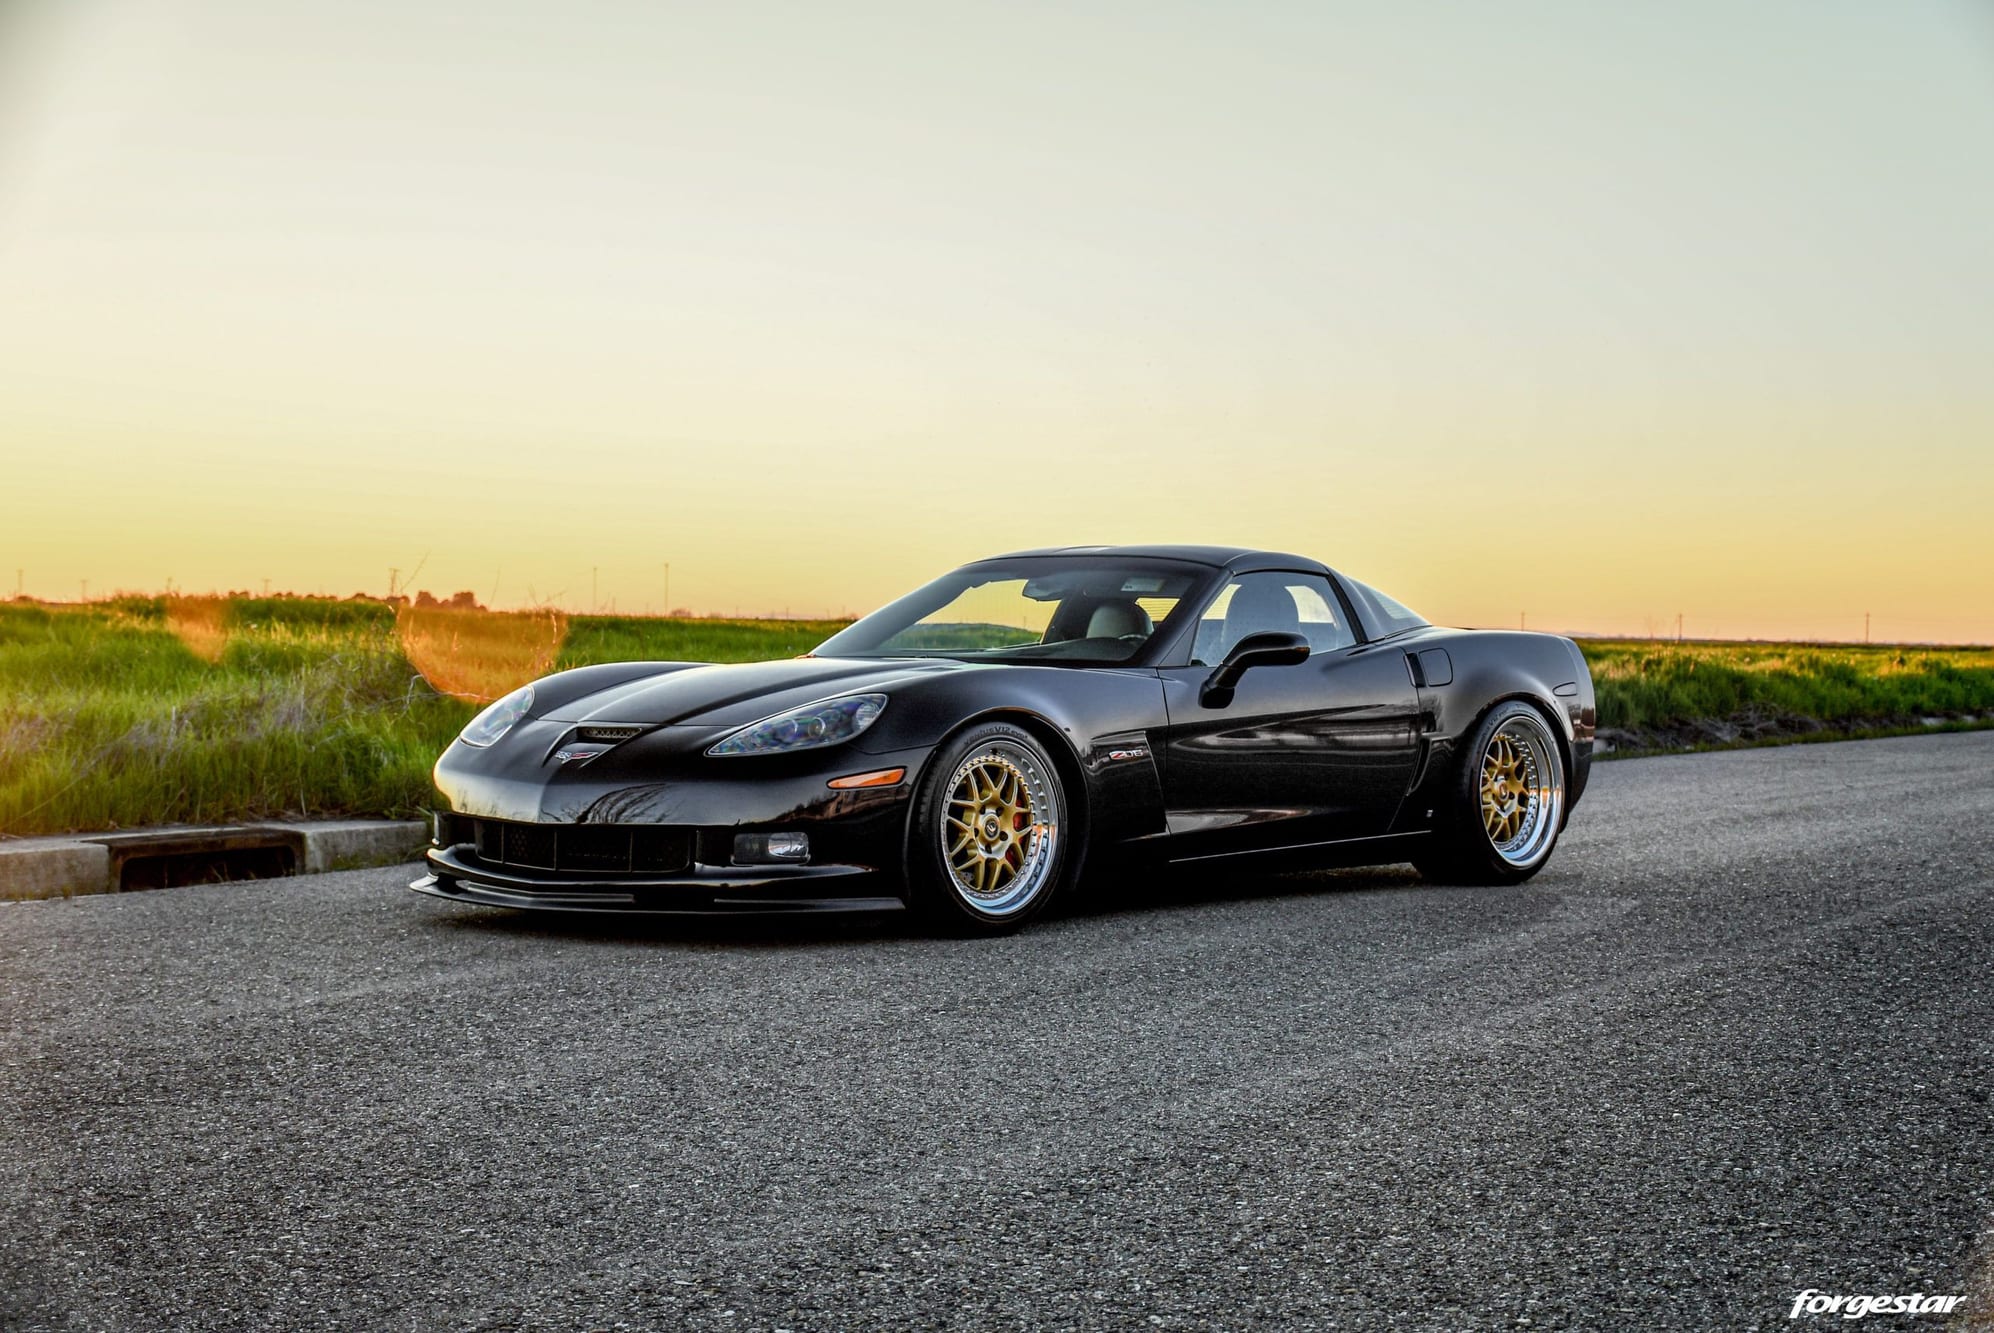 Forgestar Wheels offers a great wide selection on fitments for the Corvette...